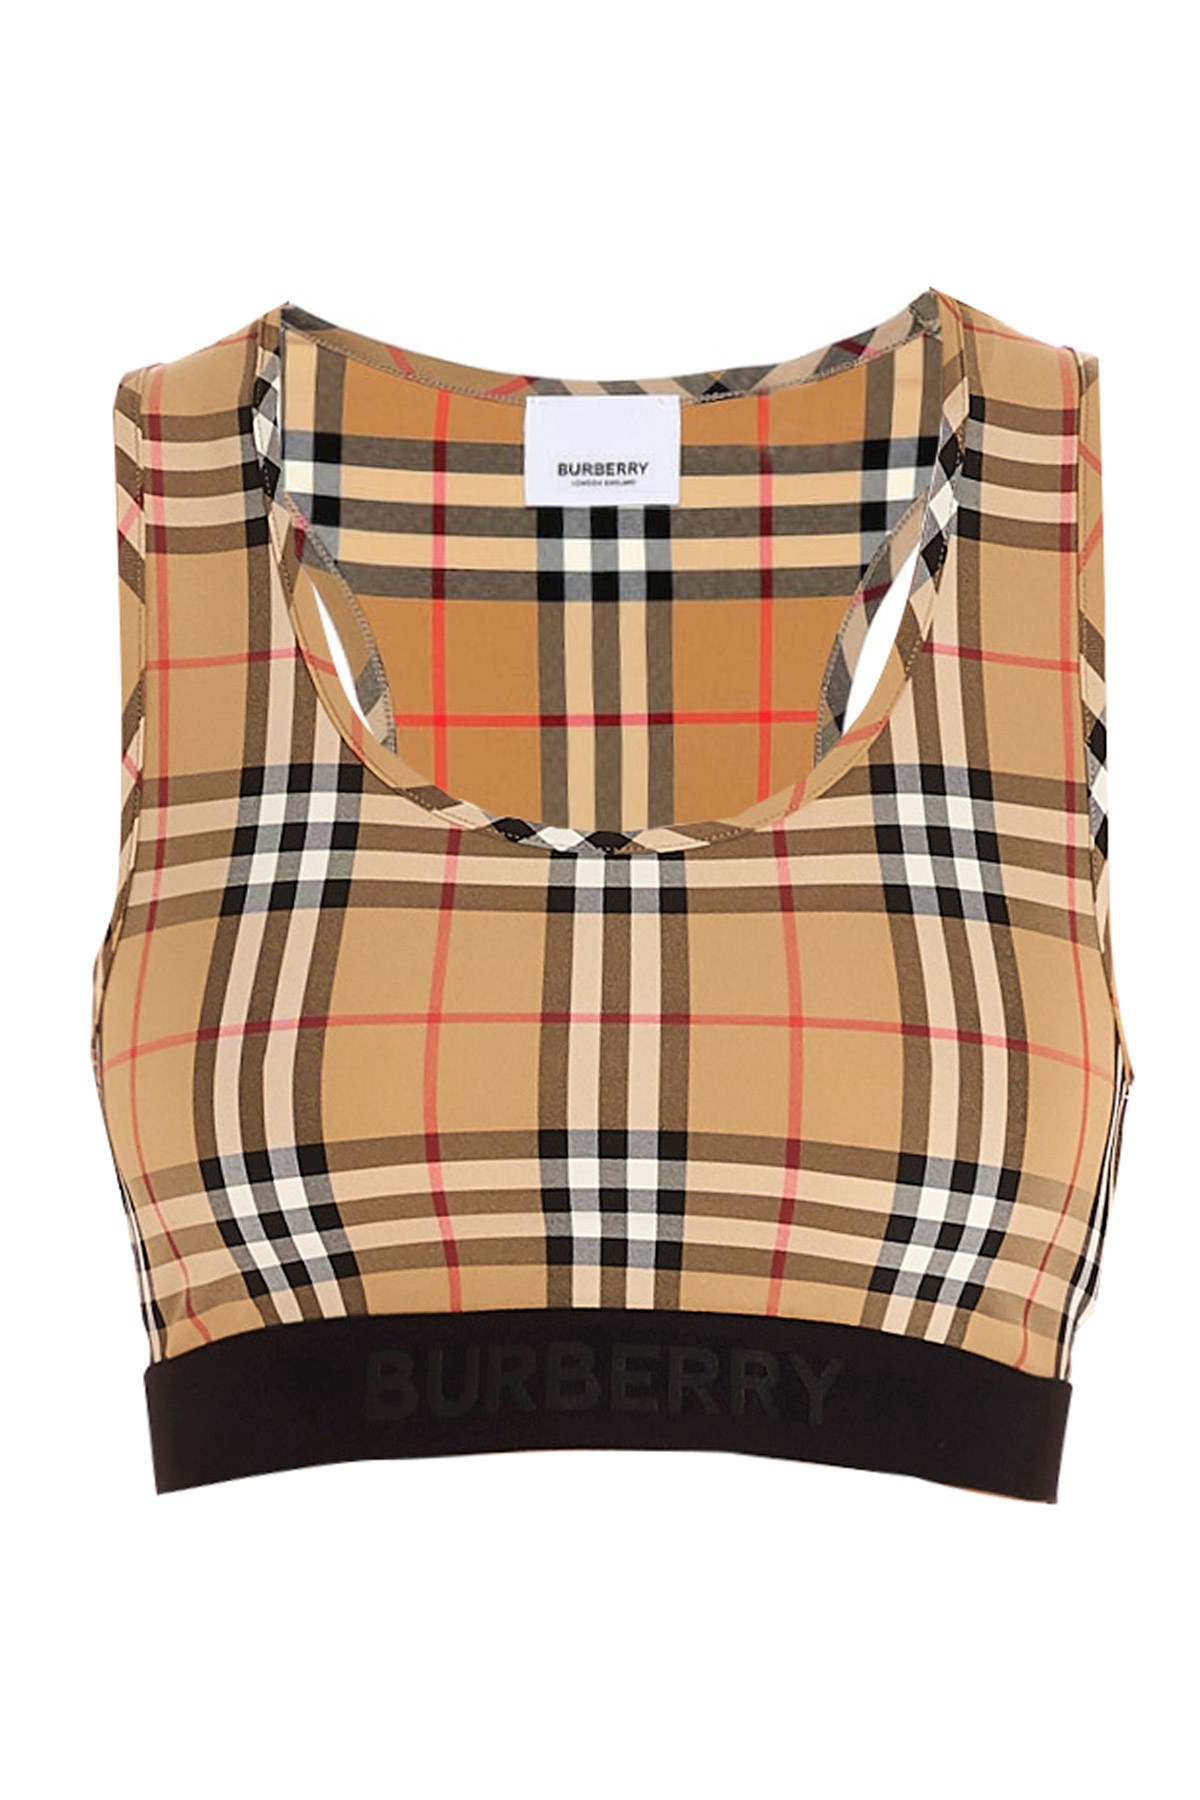 BURBERRY Top 'Dalby'